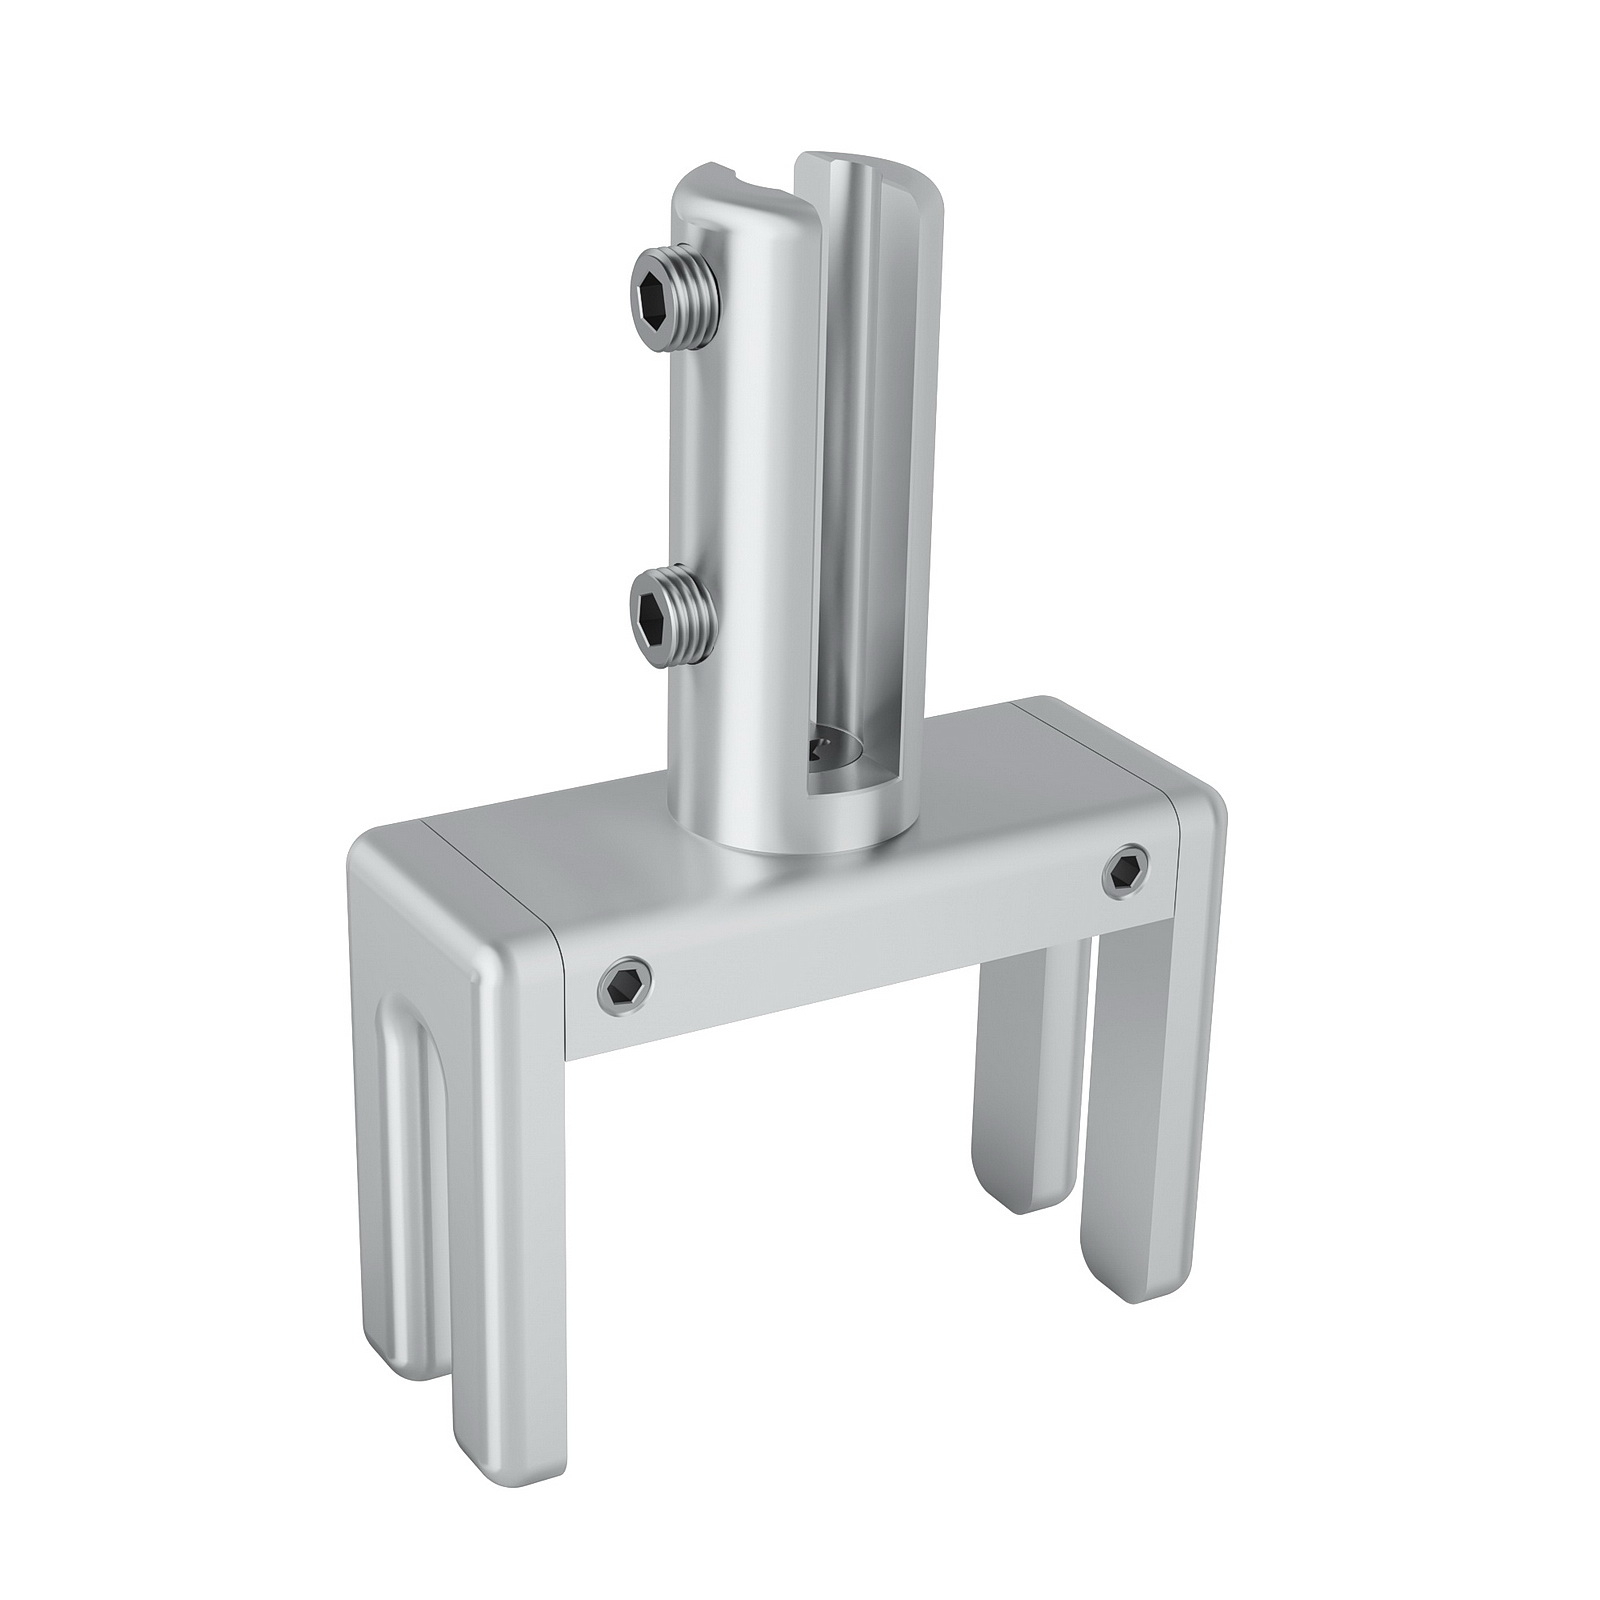 Set of 2, Adjustable Clamp, Aluminum Clear Anodized Finish, to Accommodate 1-3/4'' to 2-3/8'' Cubicle partition. Upt to 1/4'' material accepted on the fork